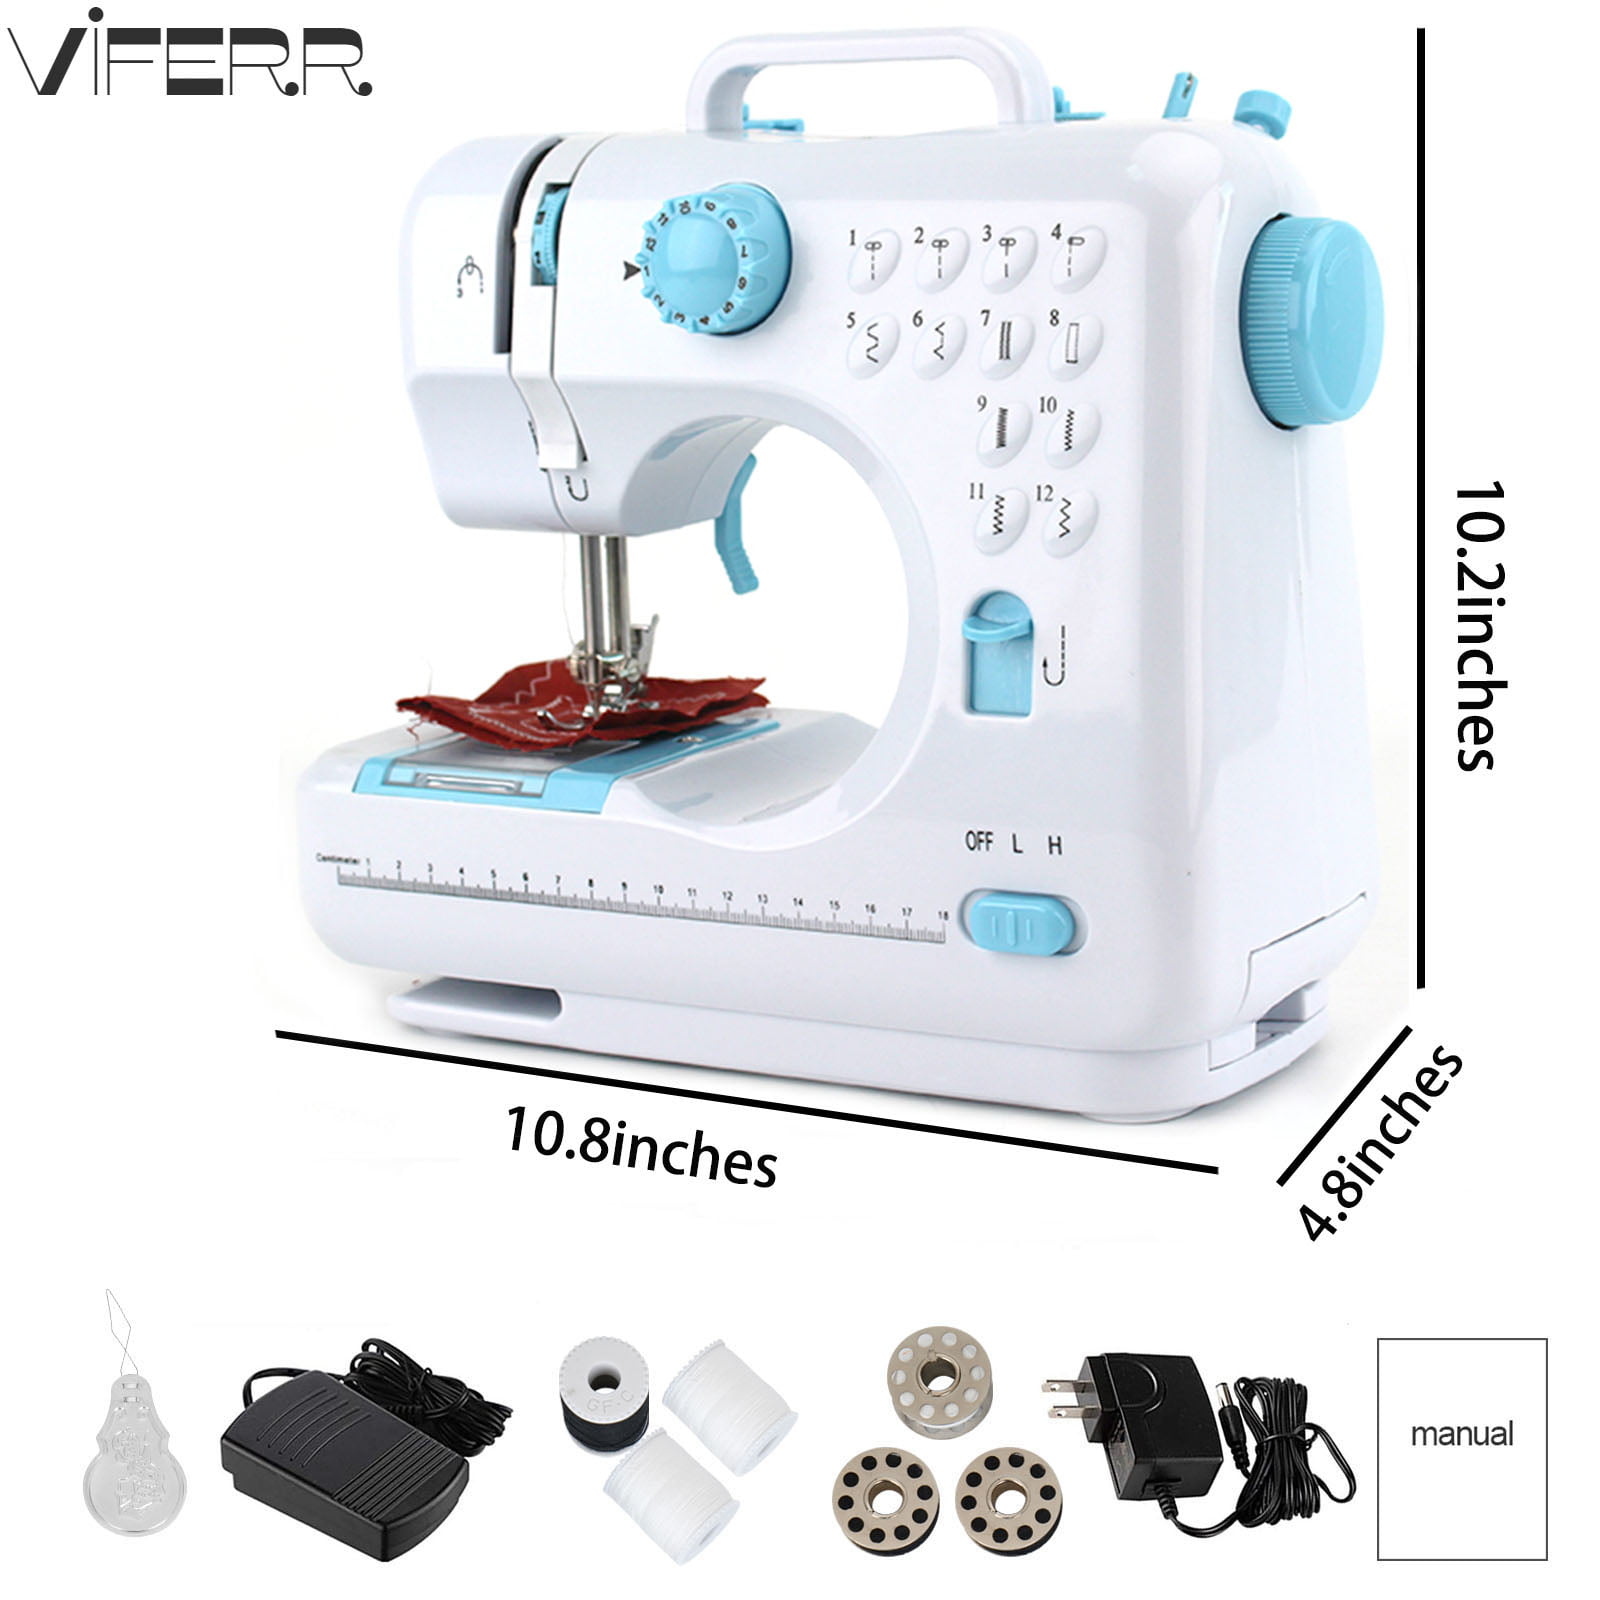 SewMAX Portable Mini Sewing Machine Great For Beginners And as